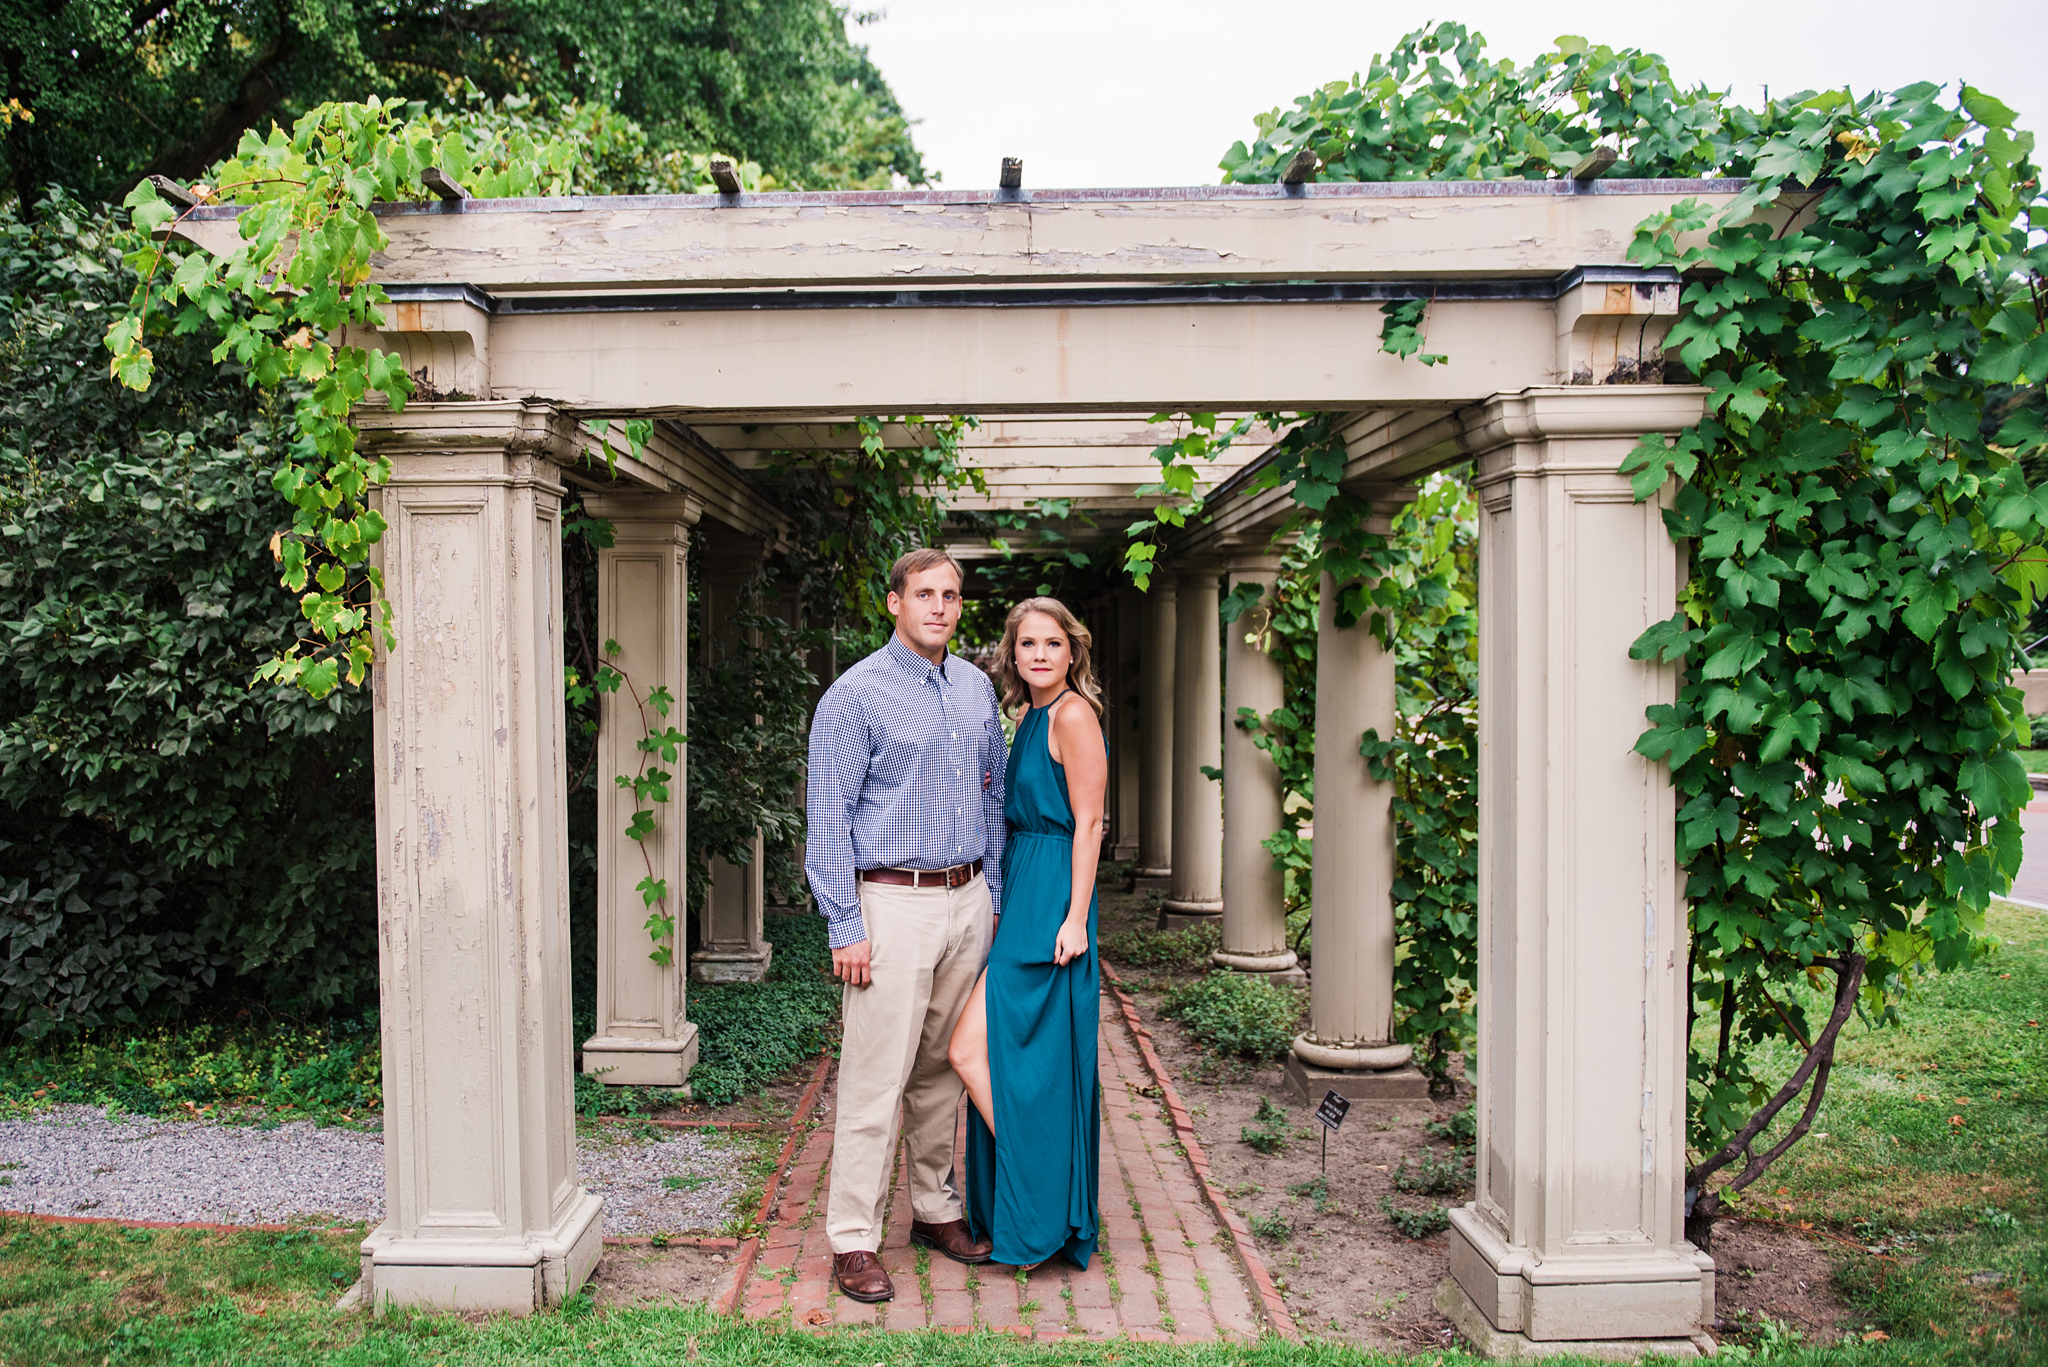 George_Eastman_House_Rochester_Yacht_Club_Rochester_Engagement_Session_JILL_STUDIO_Rochester_NY_Photographer_DSC_8108.jpg